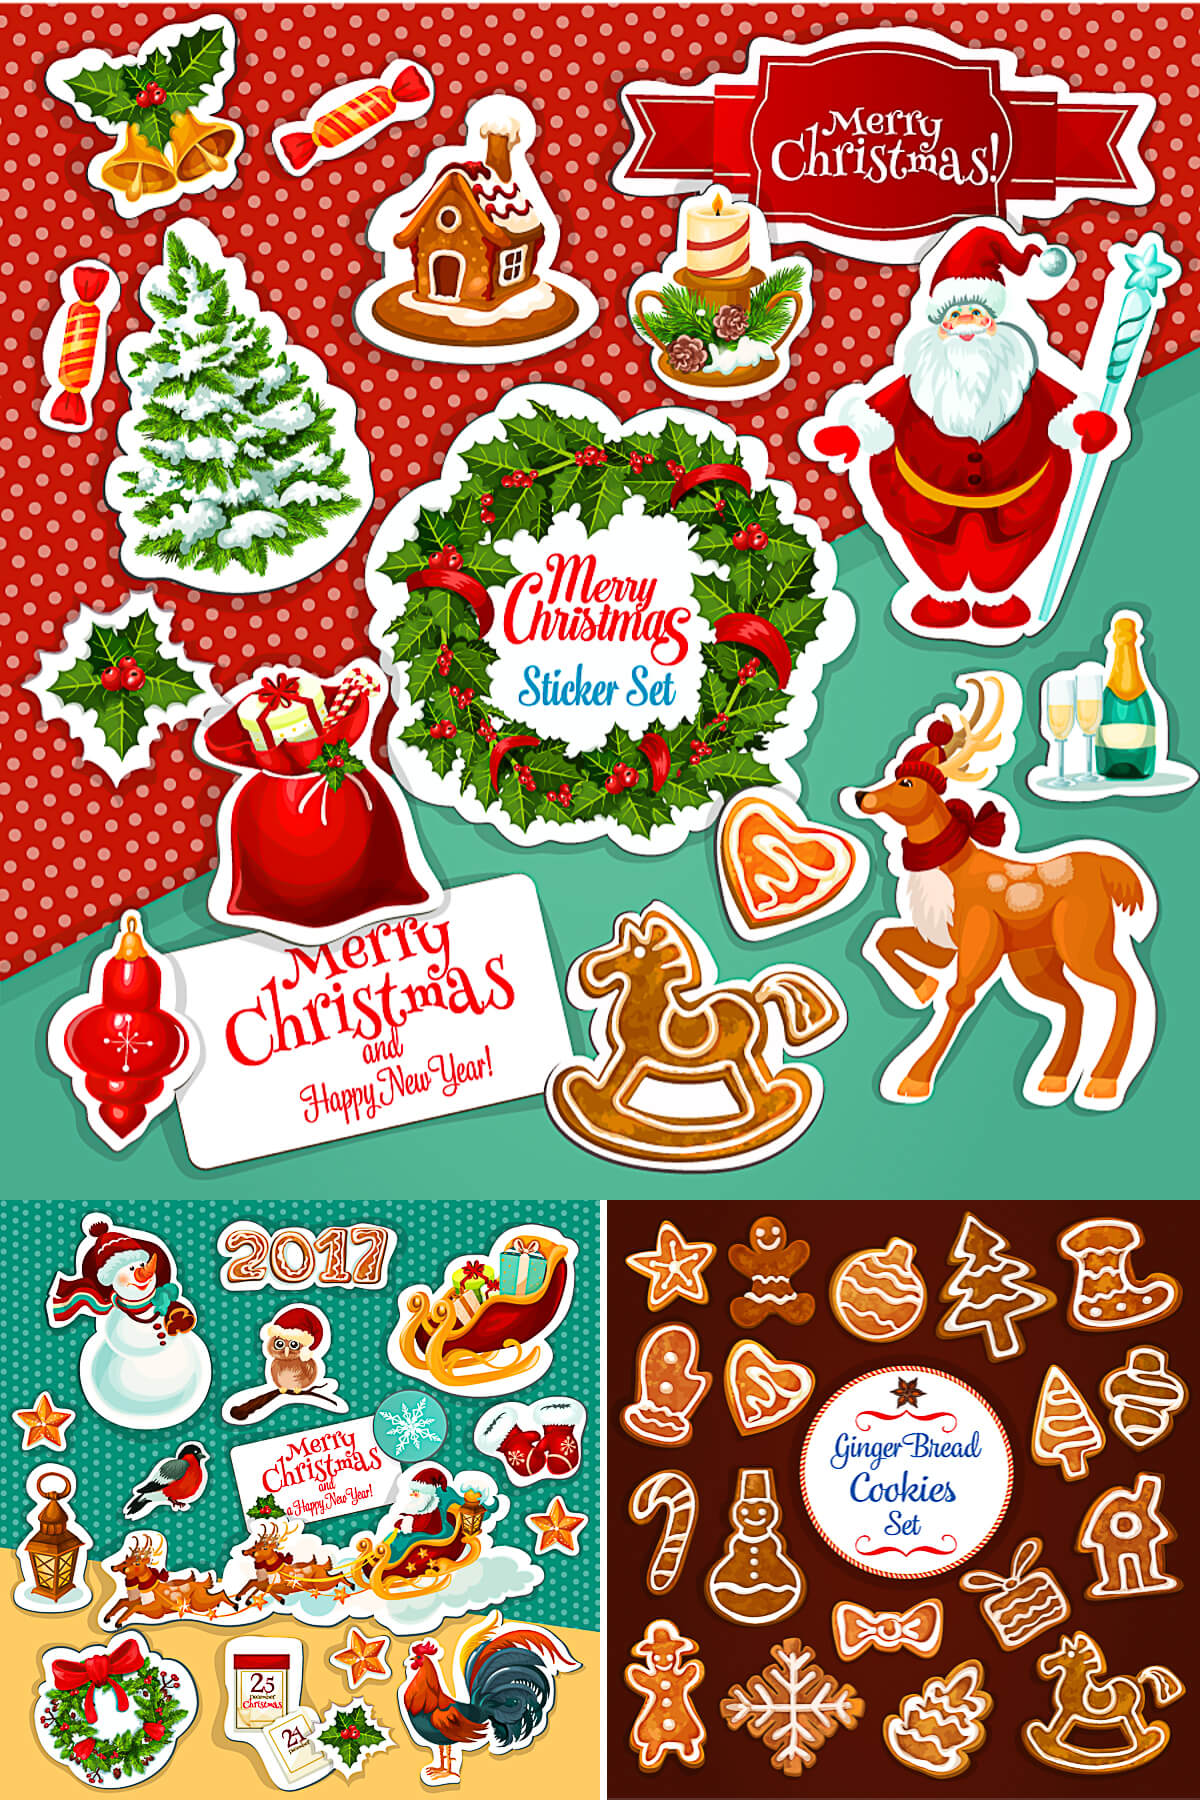 2017 Christmas decorations vector